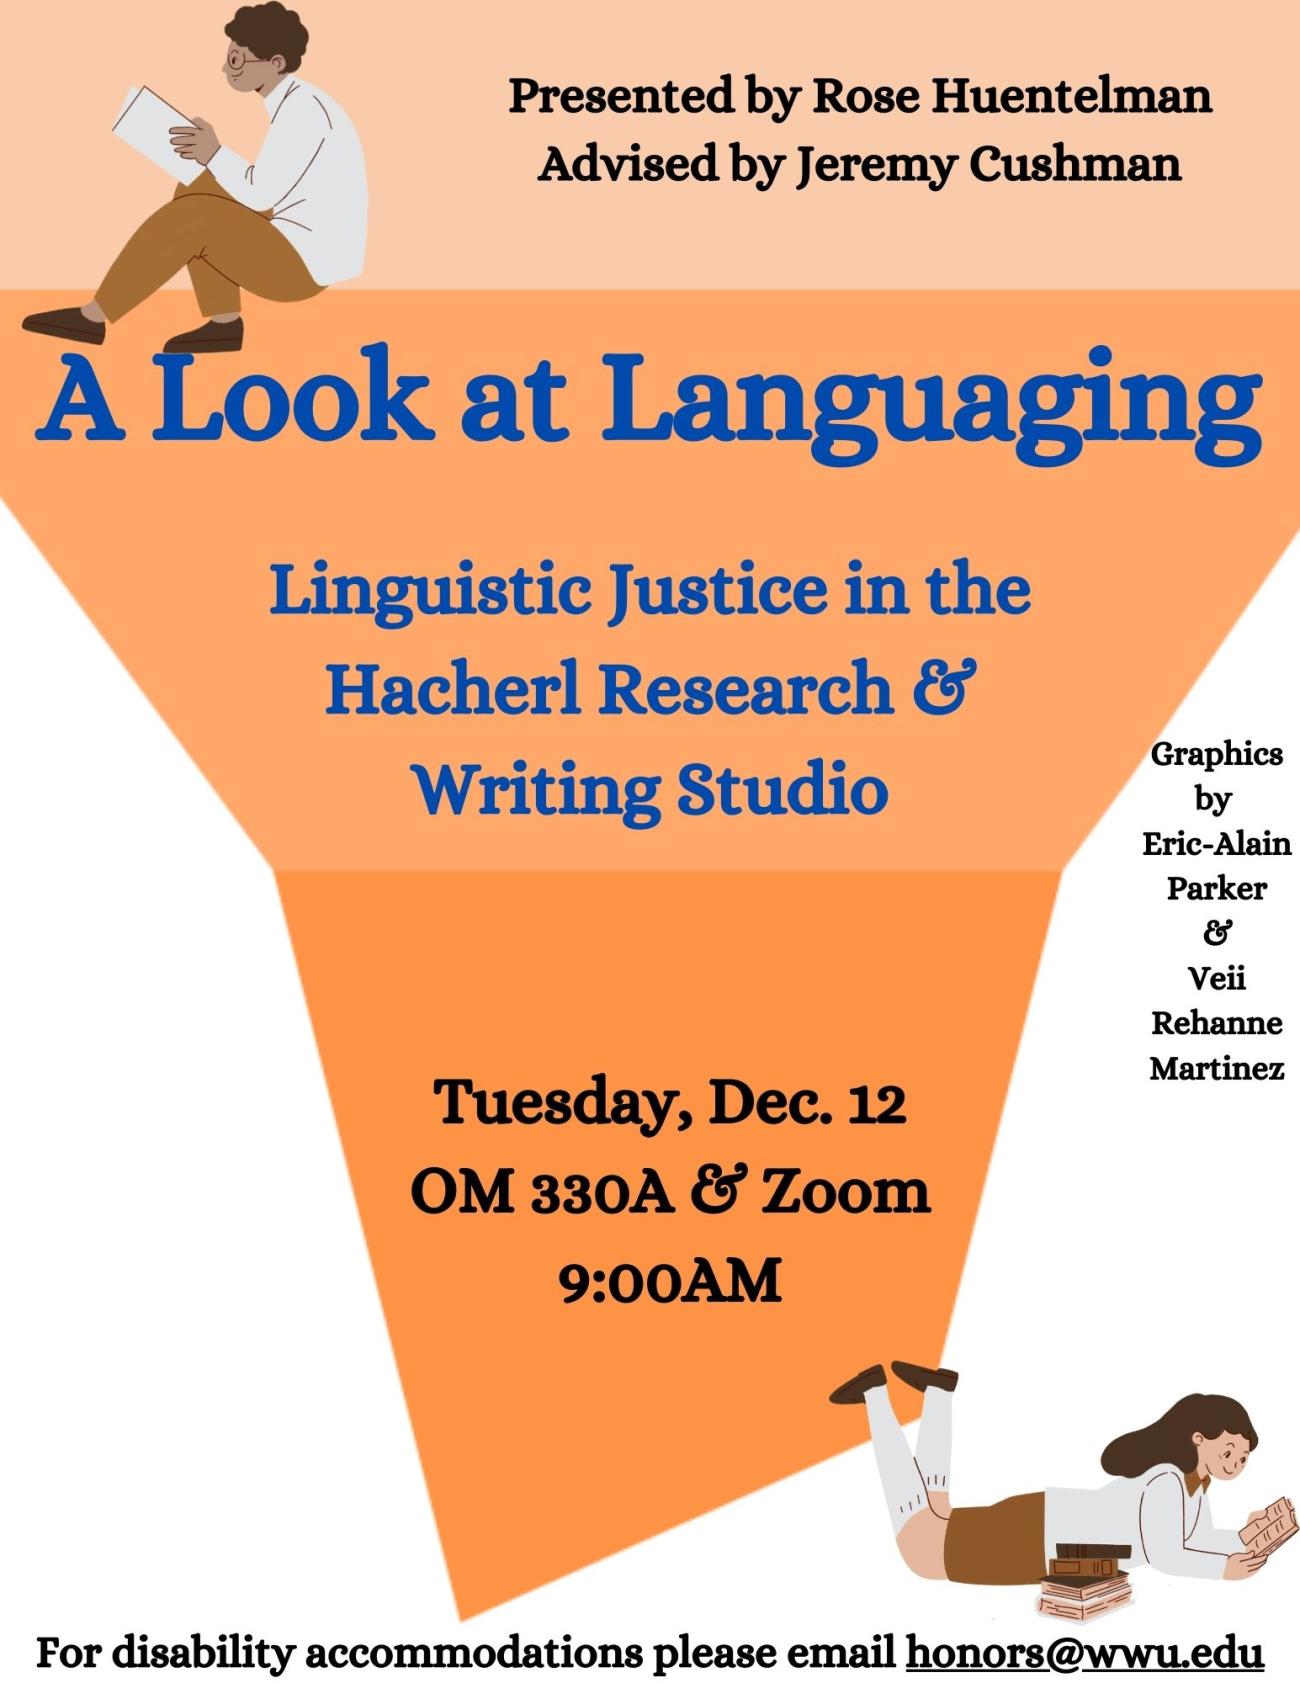 A poster with an orange funnel shape in the background and drawings of people reading books. The text reads “A Look at Languaging: Linguistic Justice in the Hacherl Research & Writing Studio. Presented by Rose Huentelman, advised by Jeremy Cushman. Graphics by Eric-Alain Parker and Veii Rehanne Martinez. Tuesday, December 12. OM 330A and Zoom. 9am. For disability accommodations, please email honors@wwu.edu